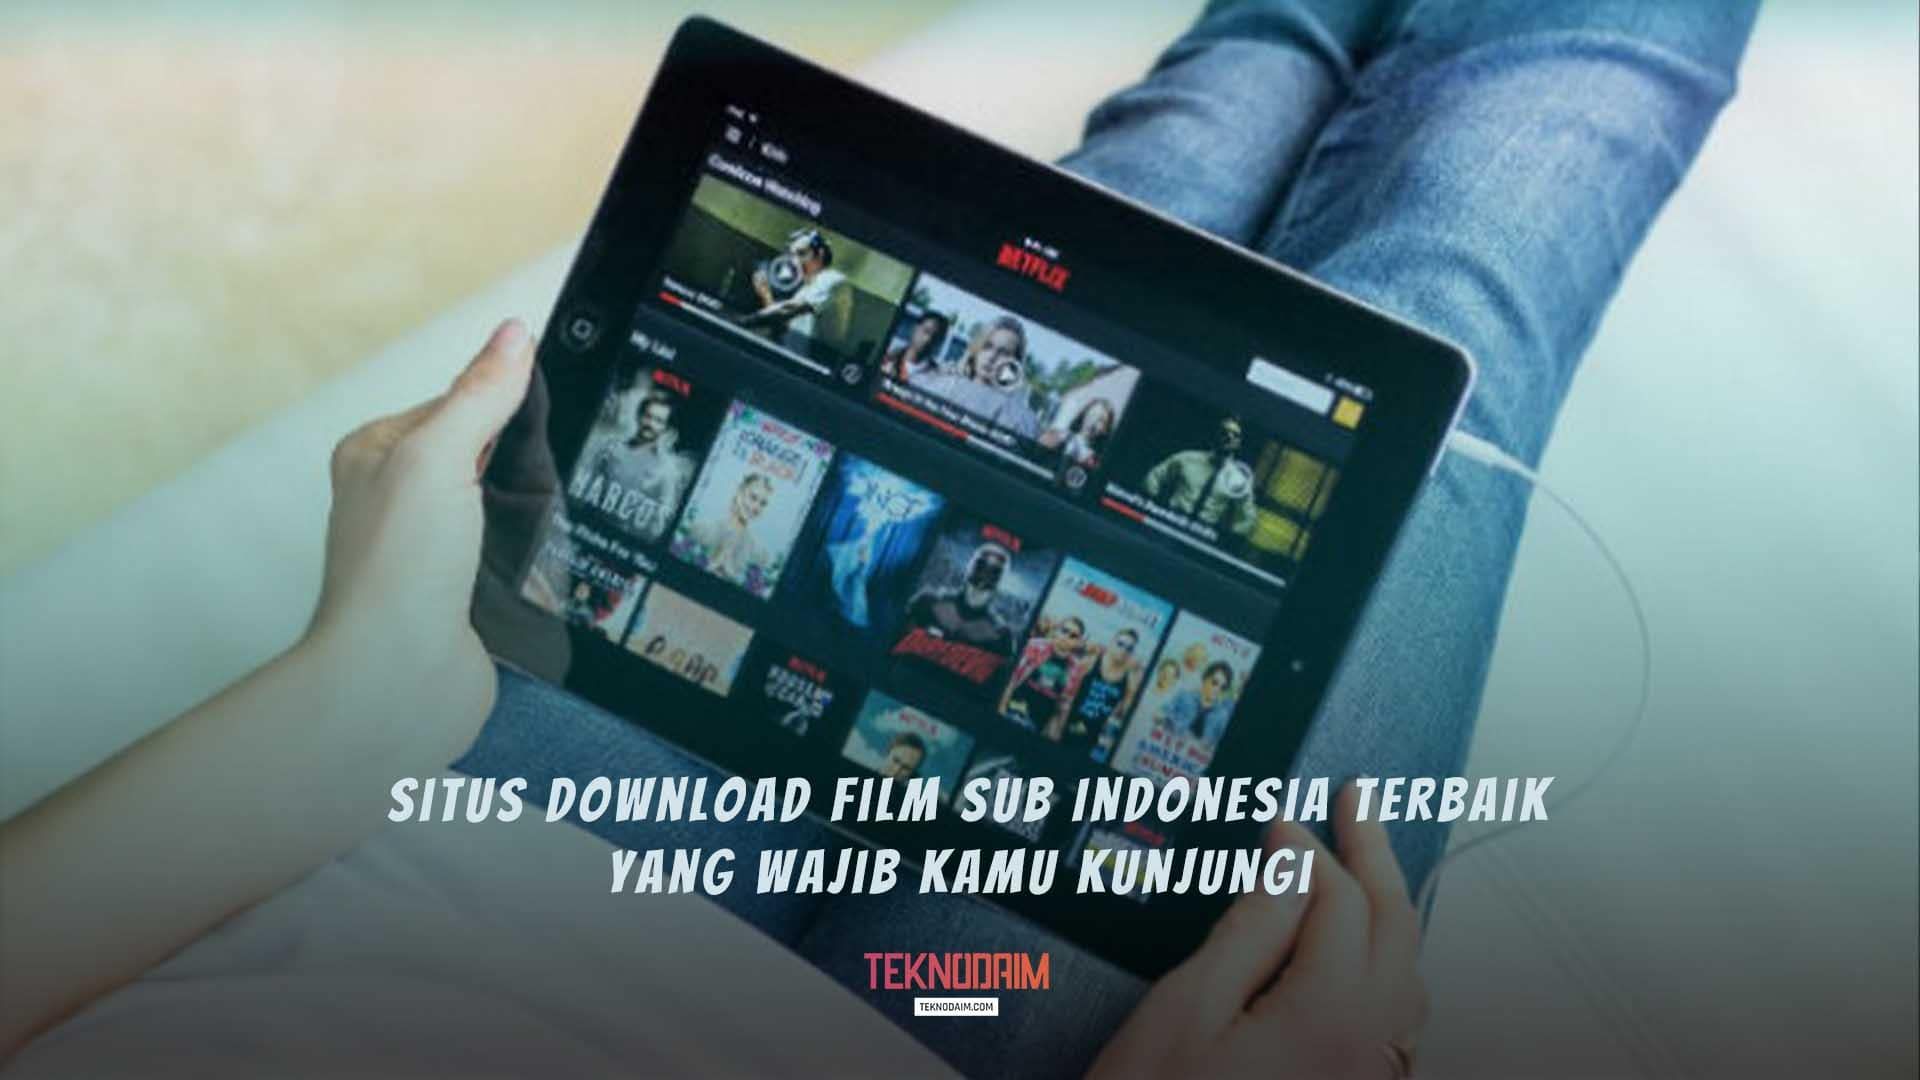 Image 10 Best Indonesian Sub Film Download Sites 2022 that You Must Visit